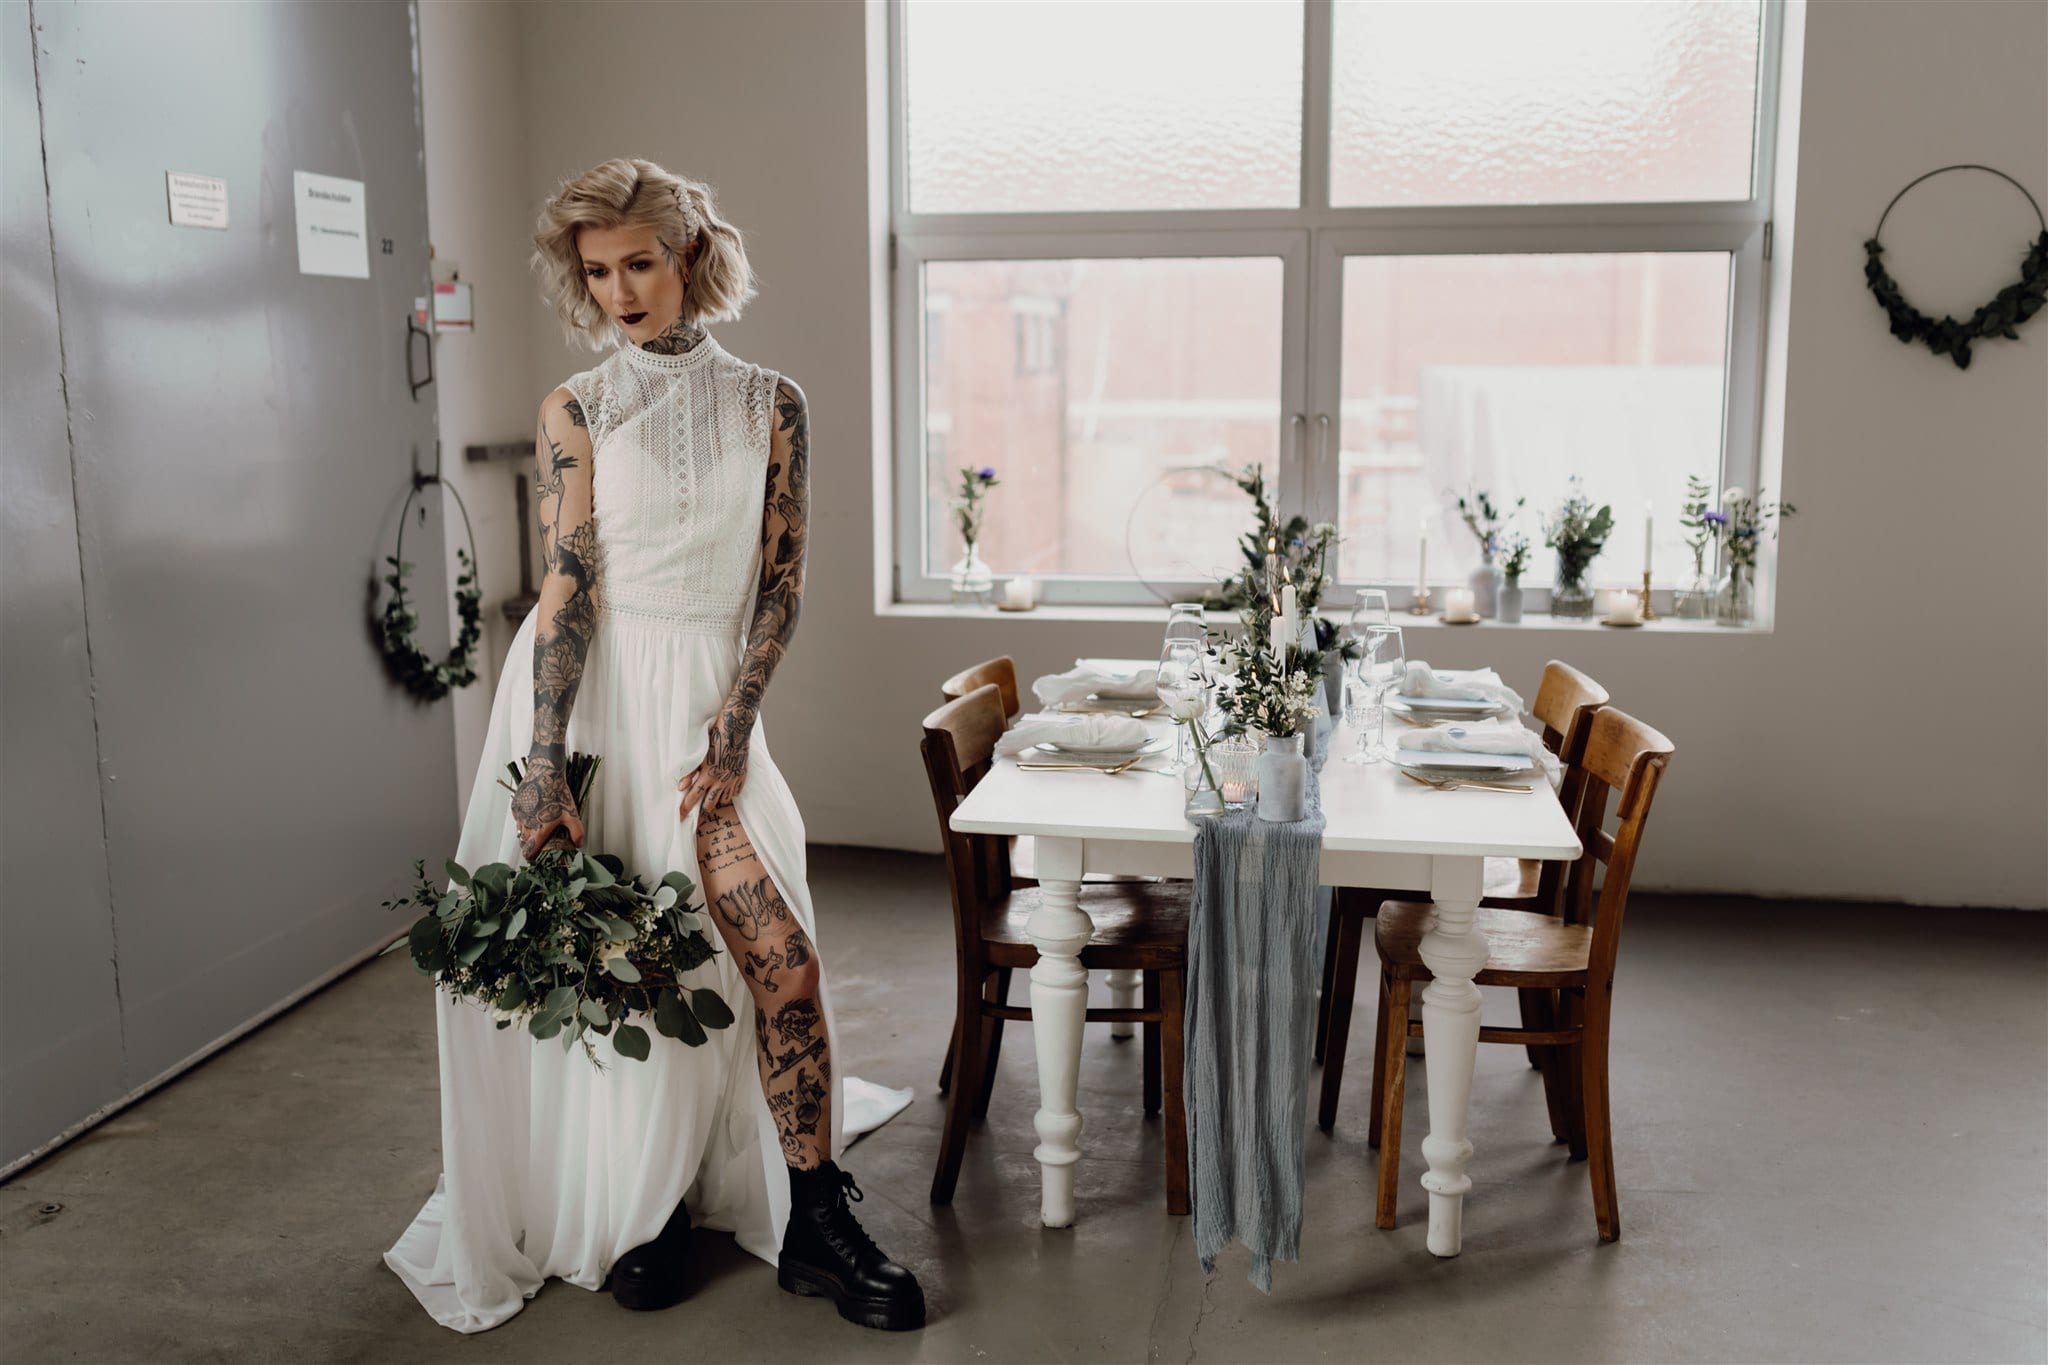 INDUSTRIAL SOFT EDGY STYLED SHOOT